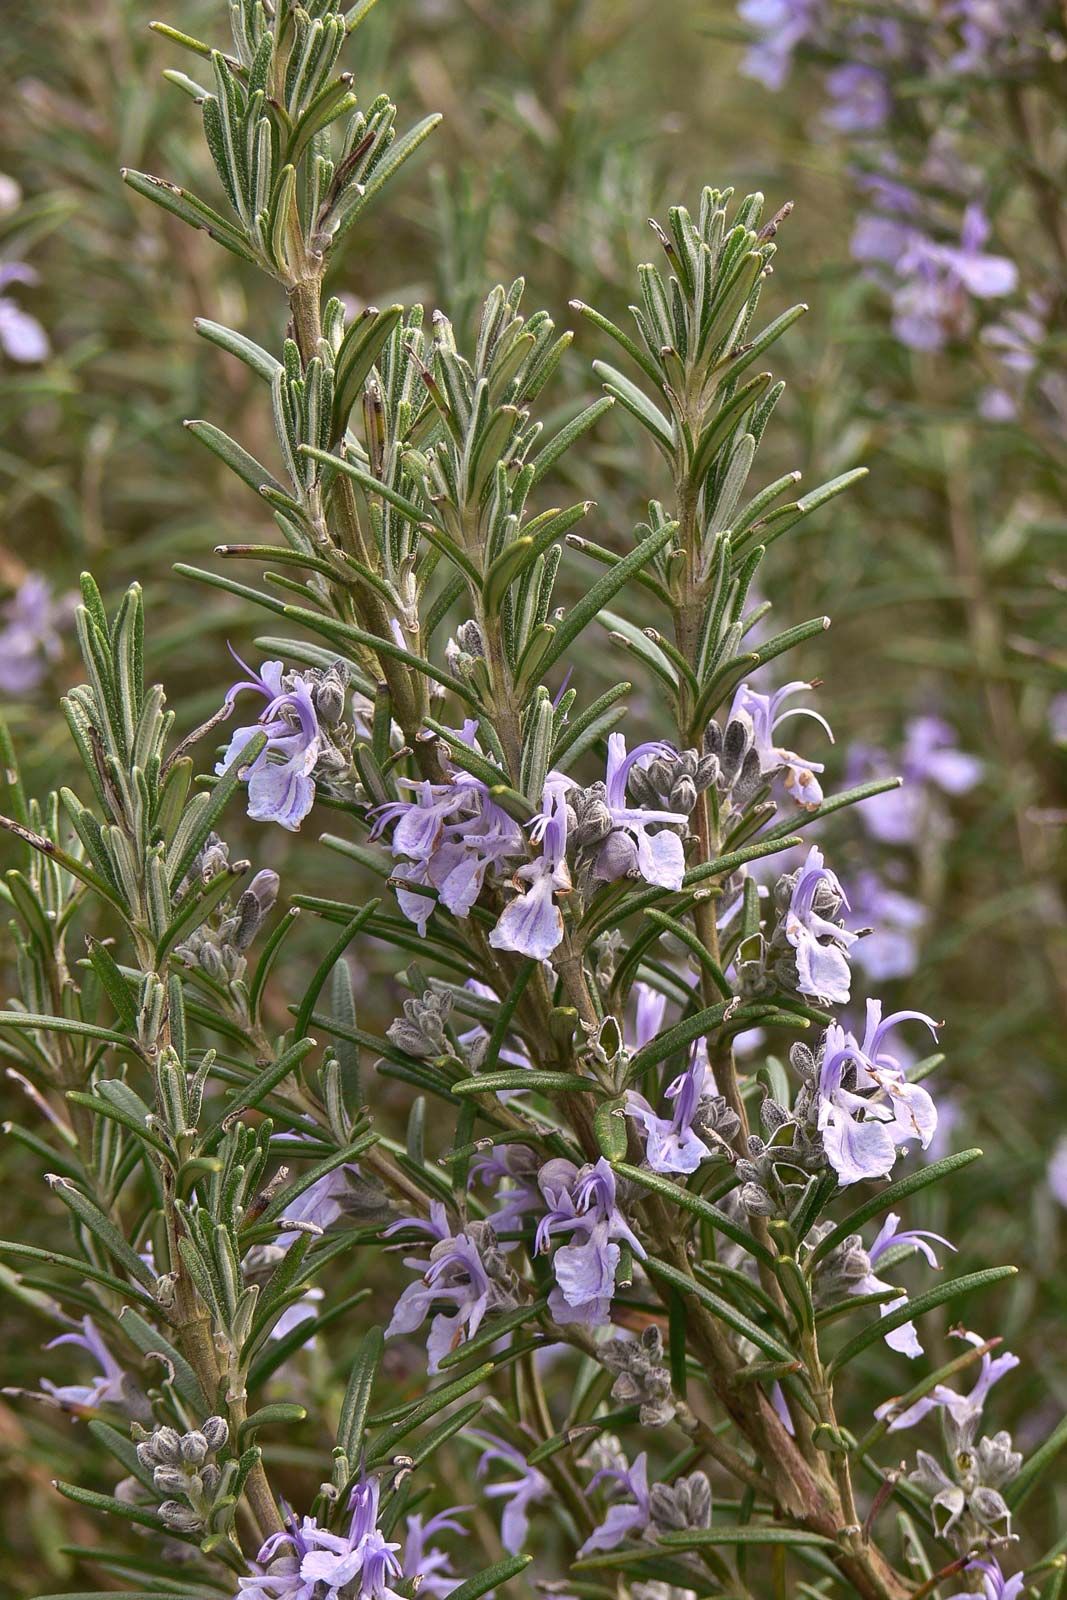 Why does my Rosemary have leaf spots?